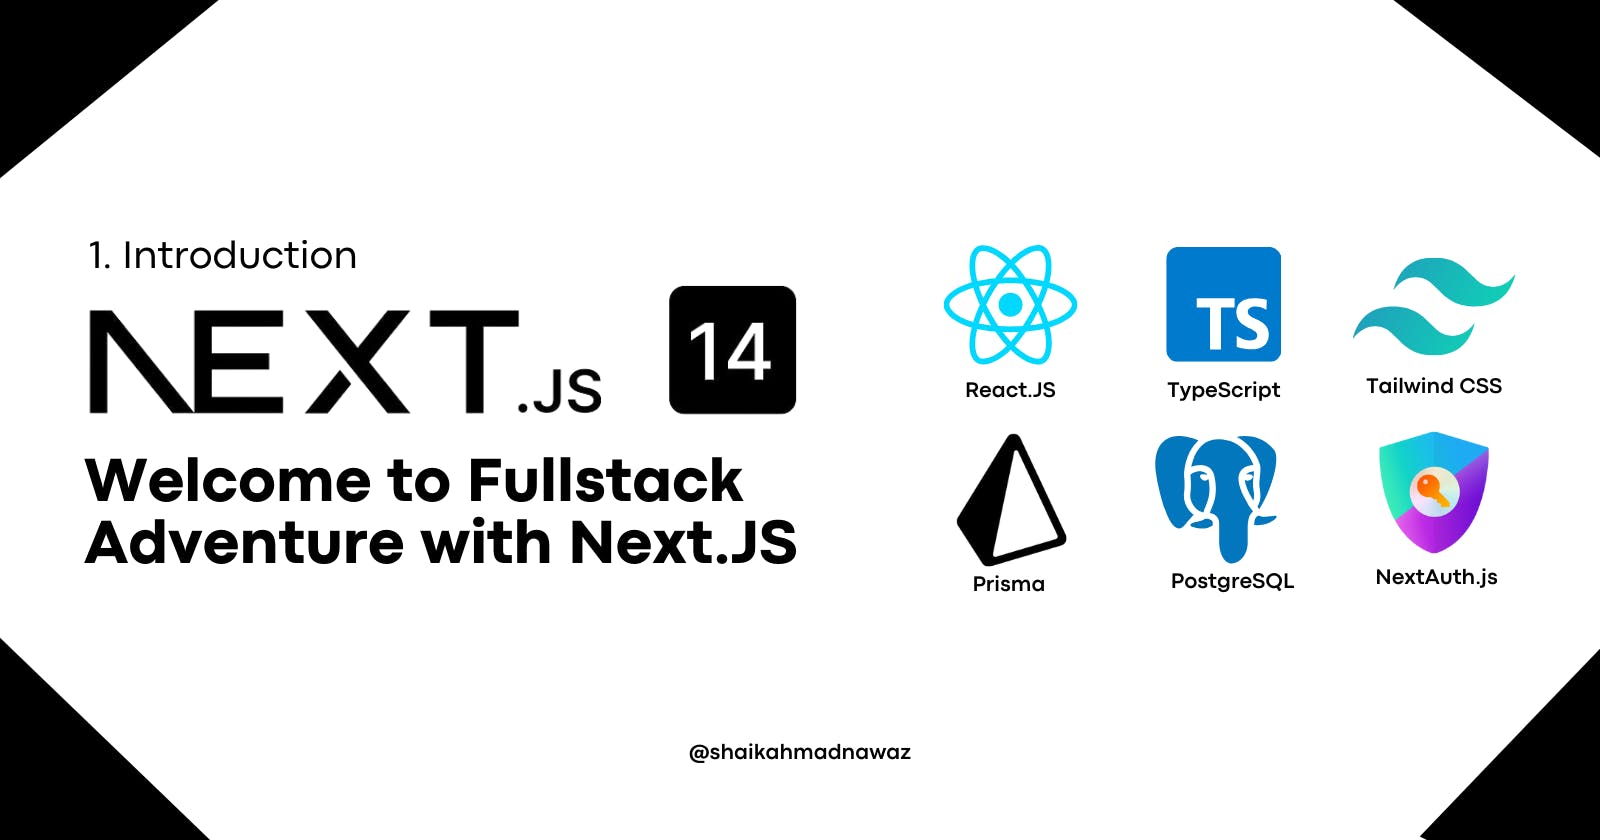 Welcome to Fullstack Adventure with Next.js